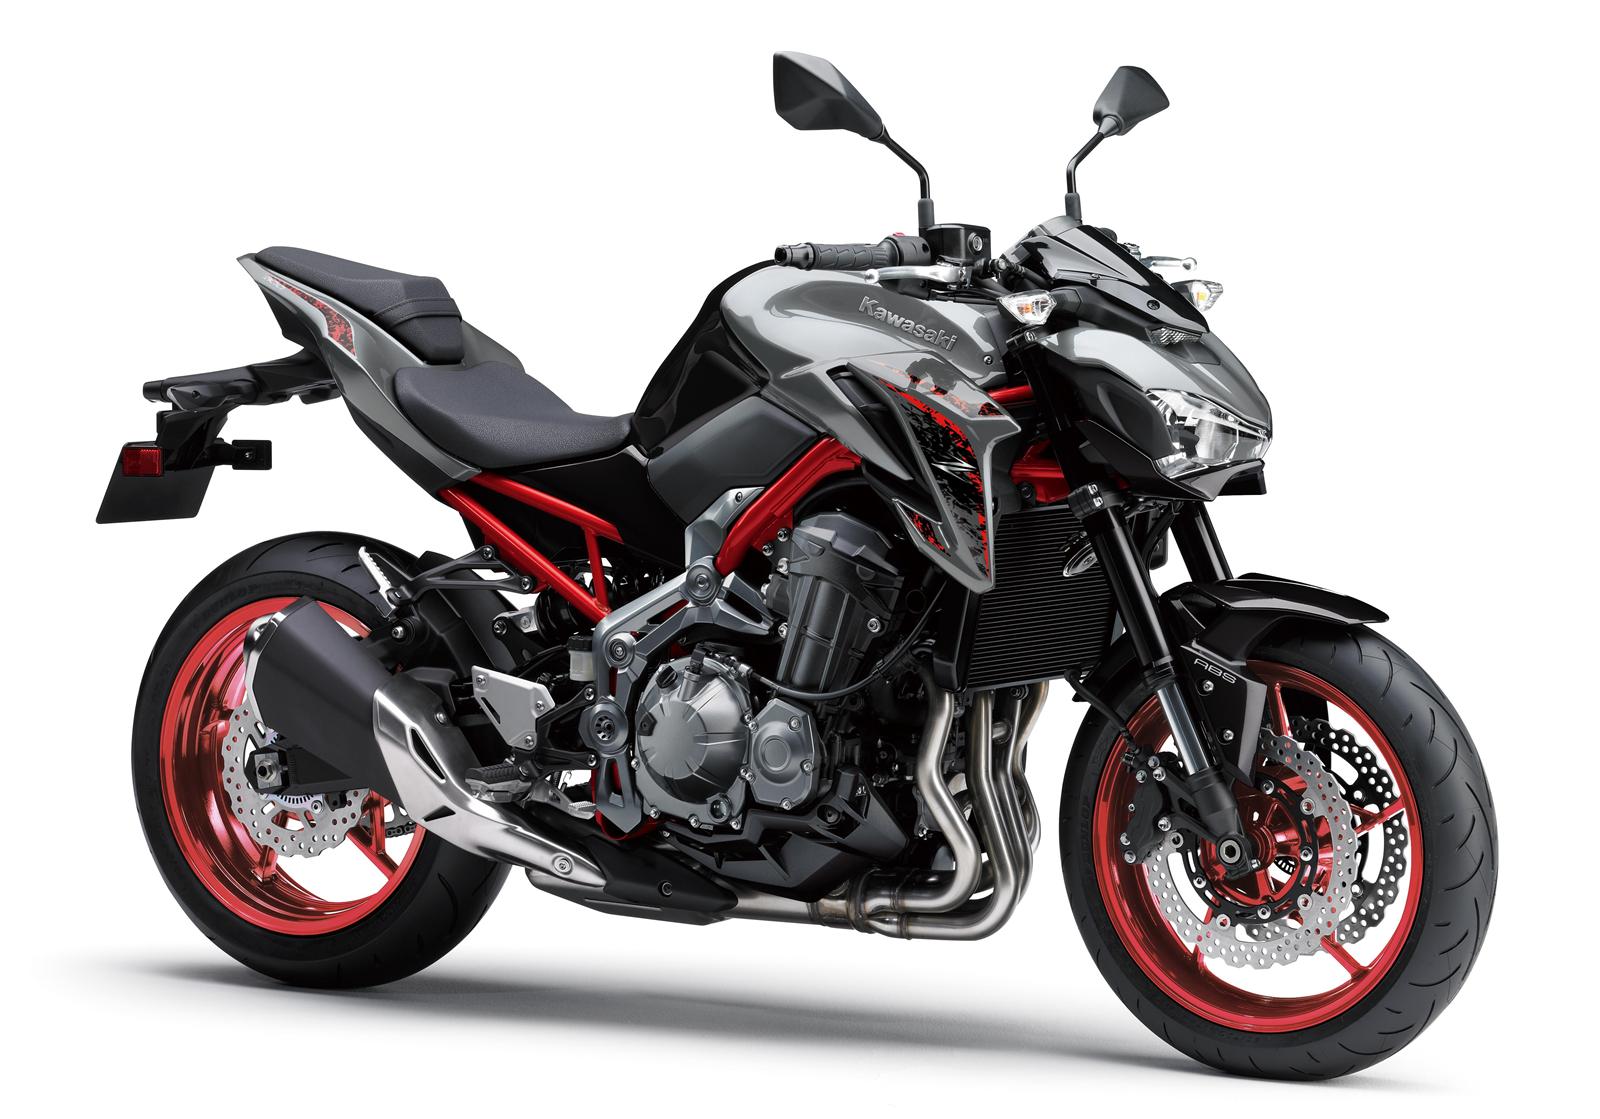 2019 Kawasaki Z900 launched in India, Priced at INR 7.68 lakh